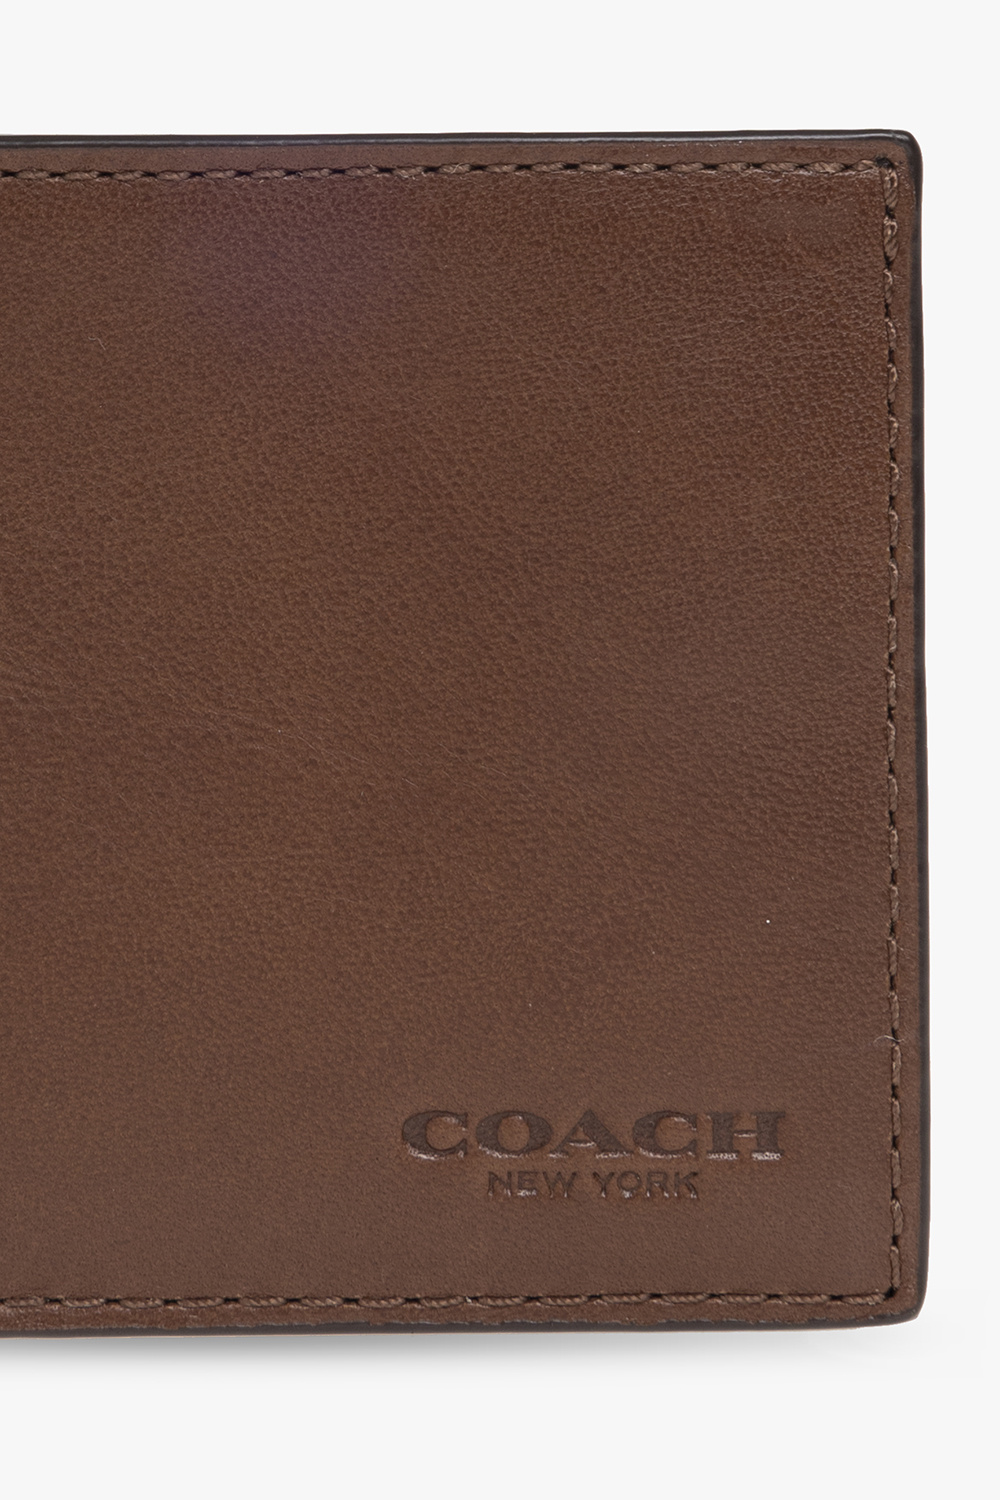 coach Homme Folding wallet with vintage effect